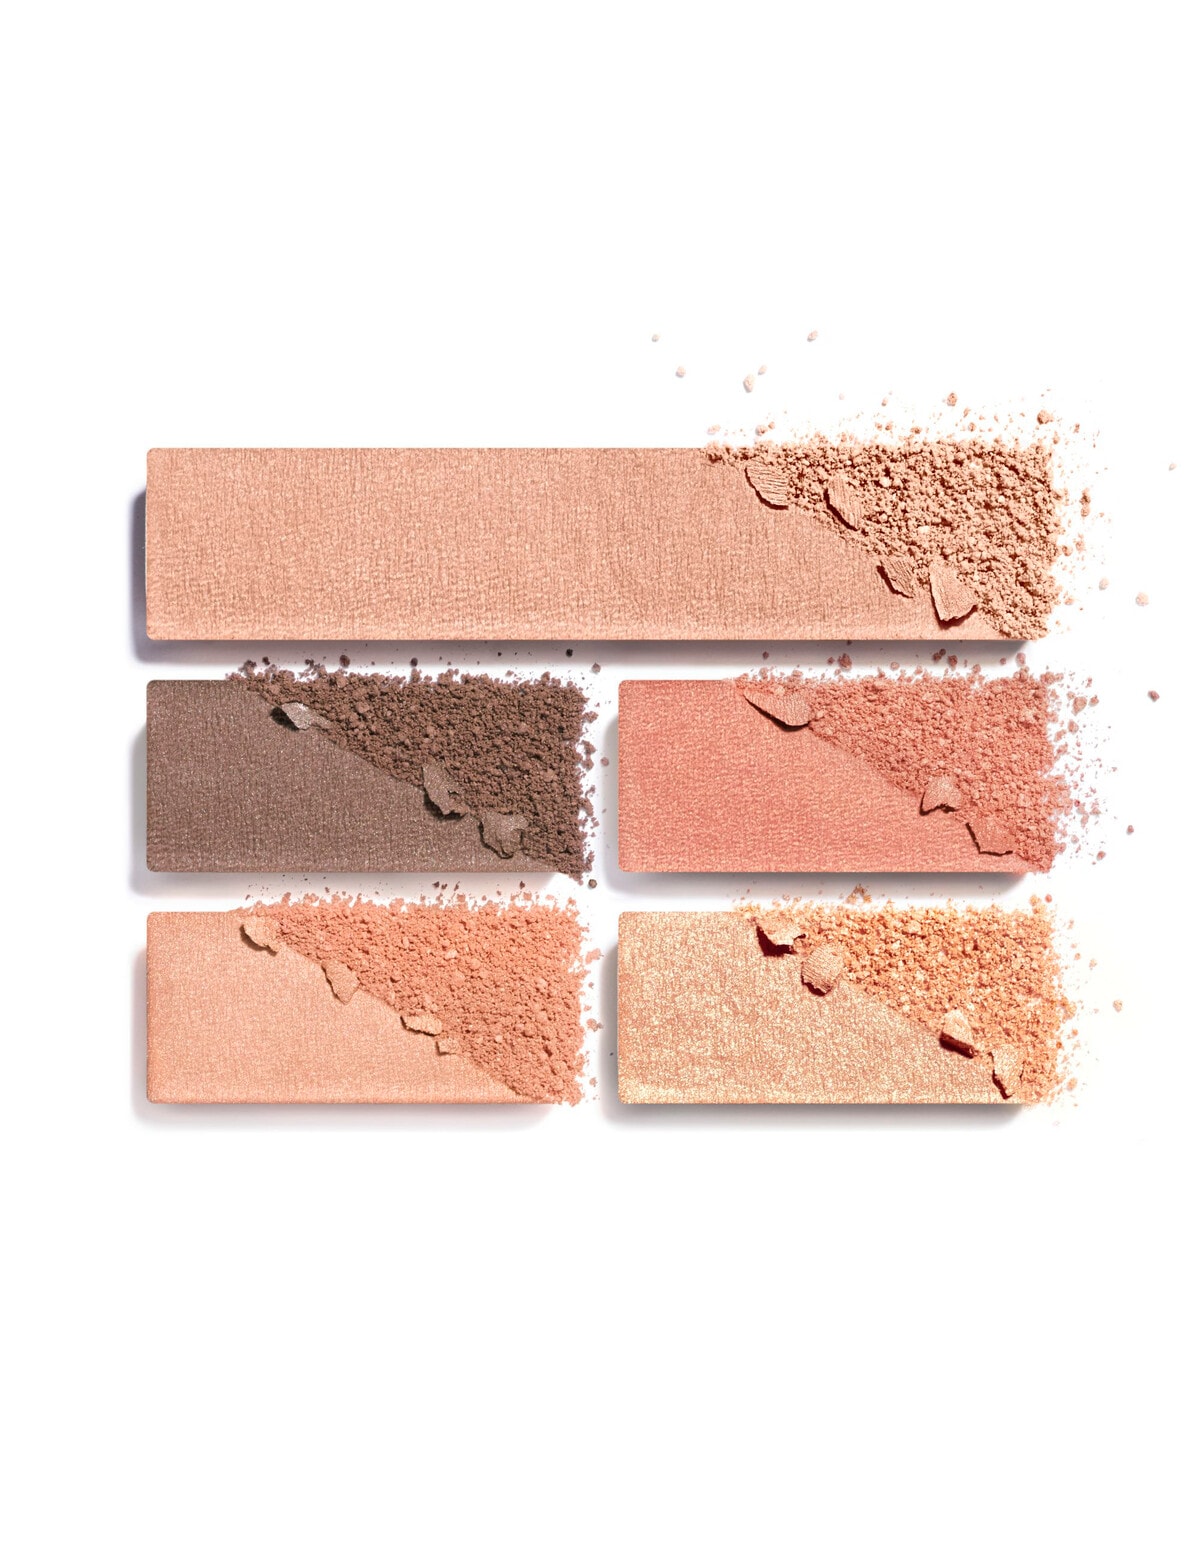 chanel les beiges healthy glow natural eyeshadow palette